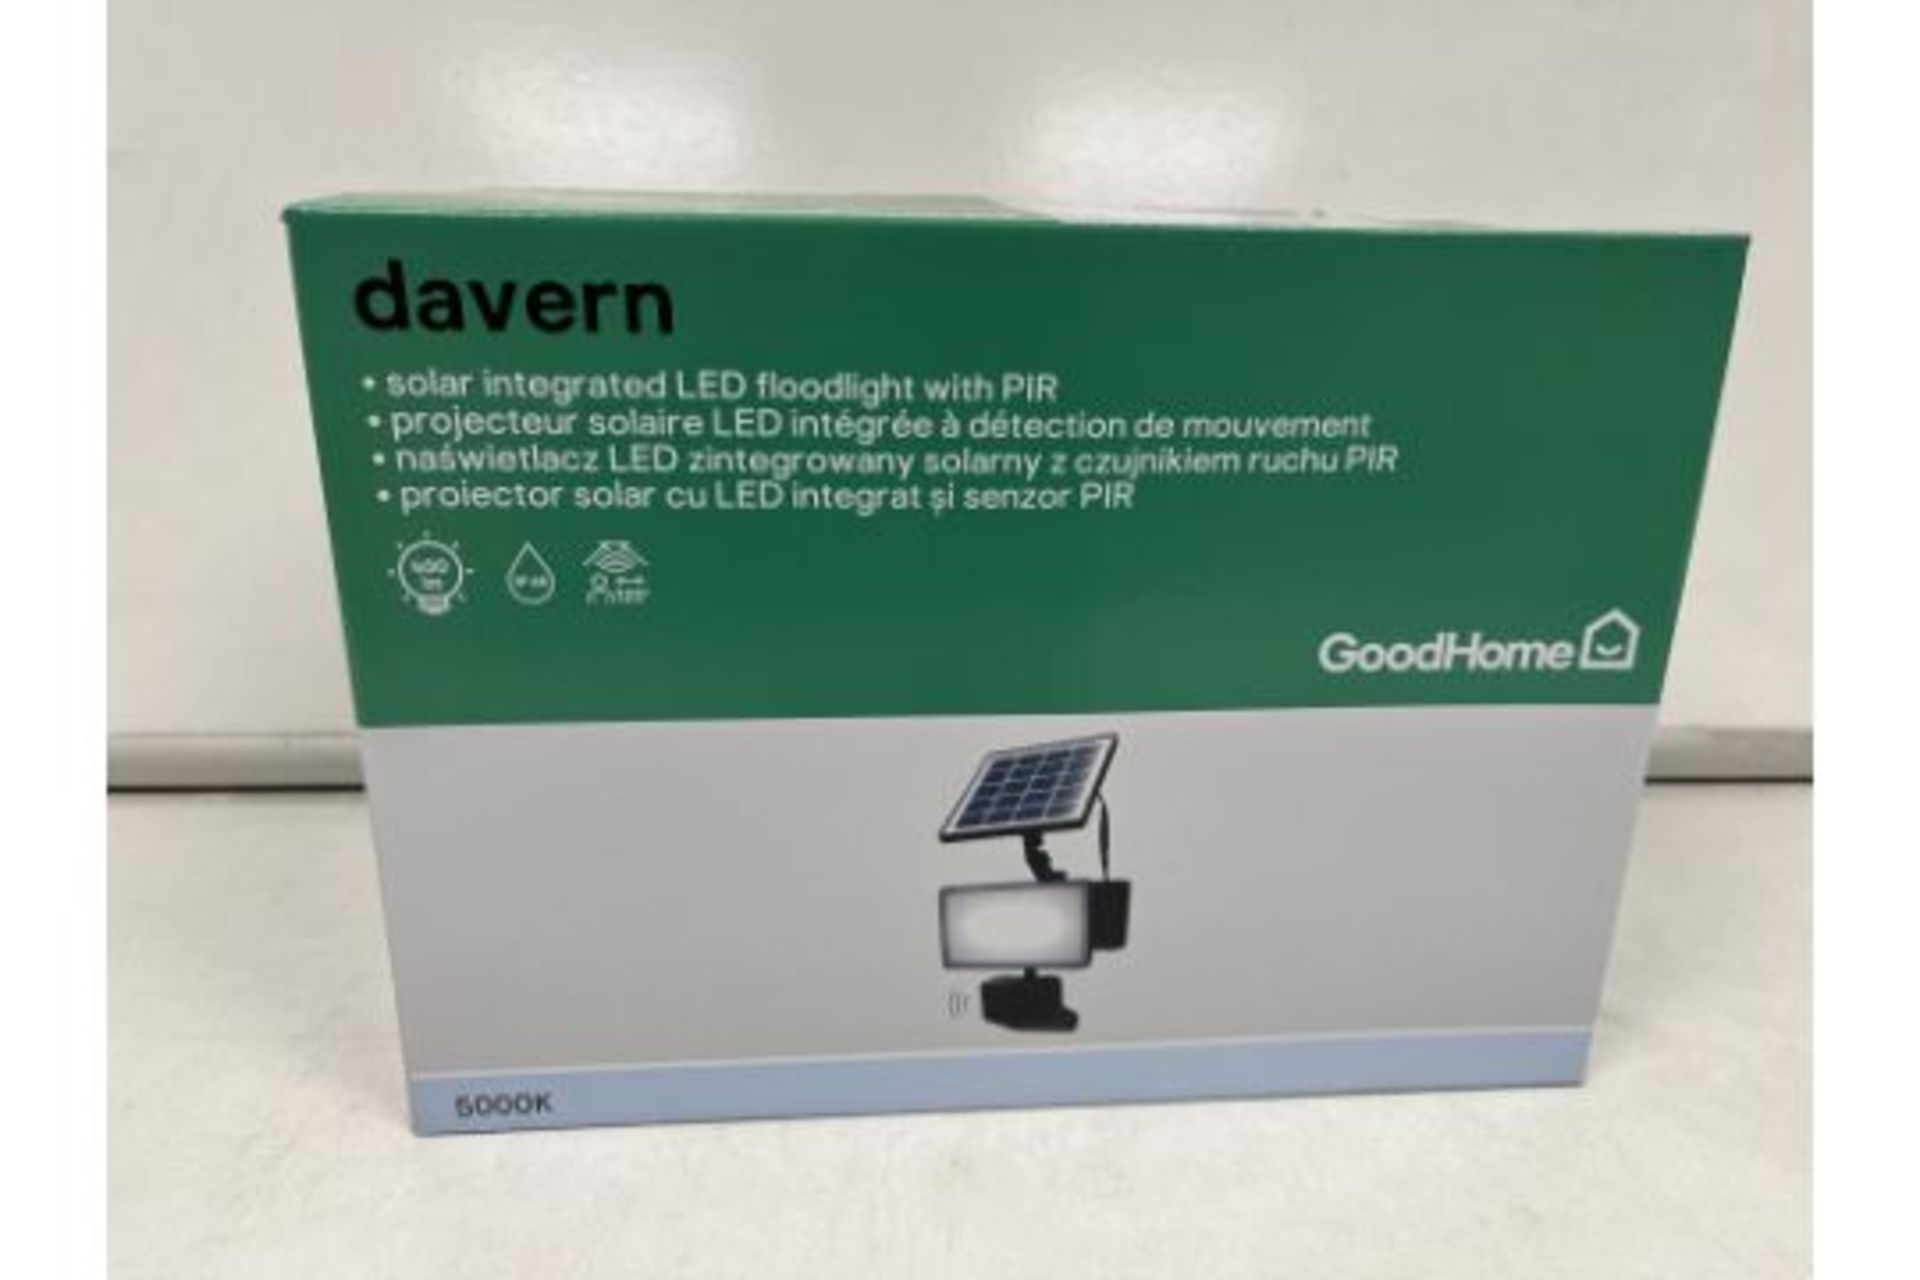 4 X NEW BOXED GOODHOME DAVERN SOLAR INTEGREATED LED FLOODLIGHT WITH PIR. 4000 LUMENS. 5000K. (ROW1.